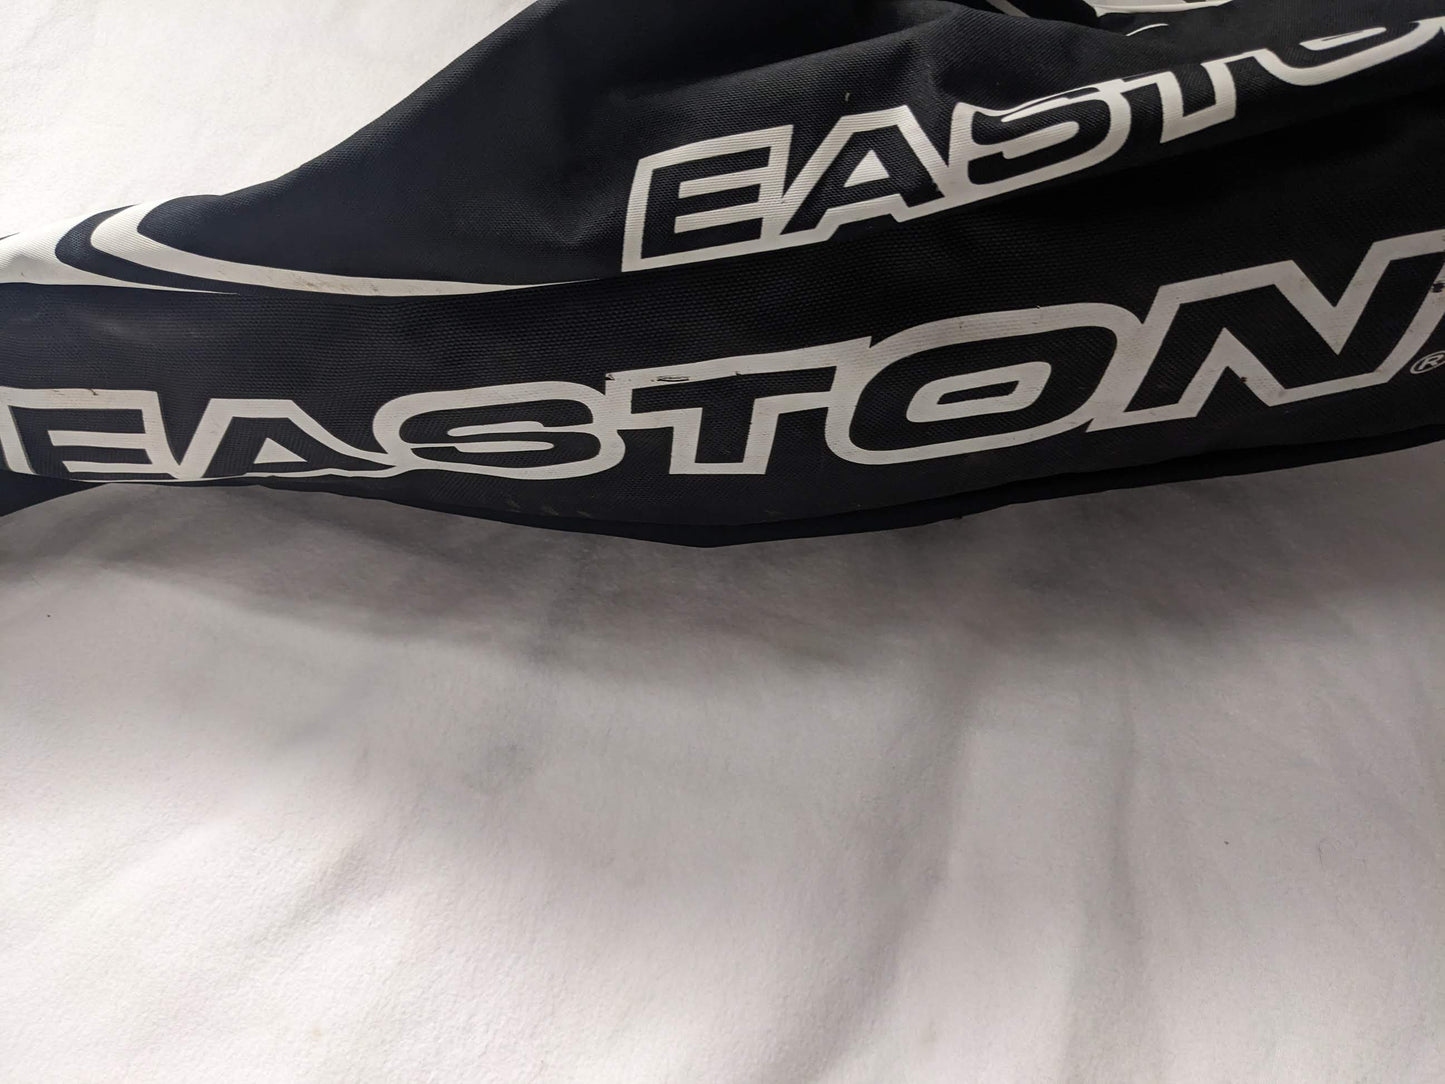 Easton Baseball/Softball Tote Bag Size 35 In Color Black Condition Used